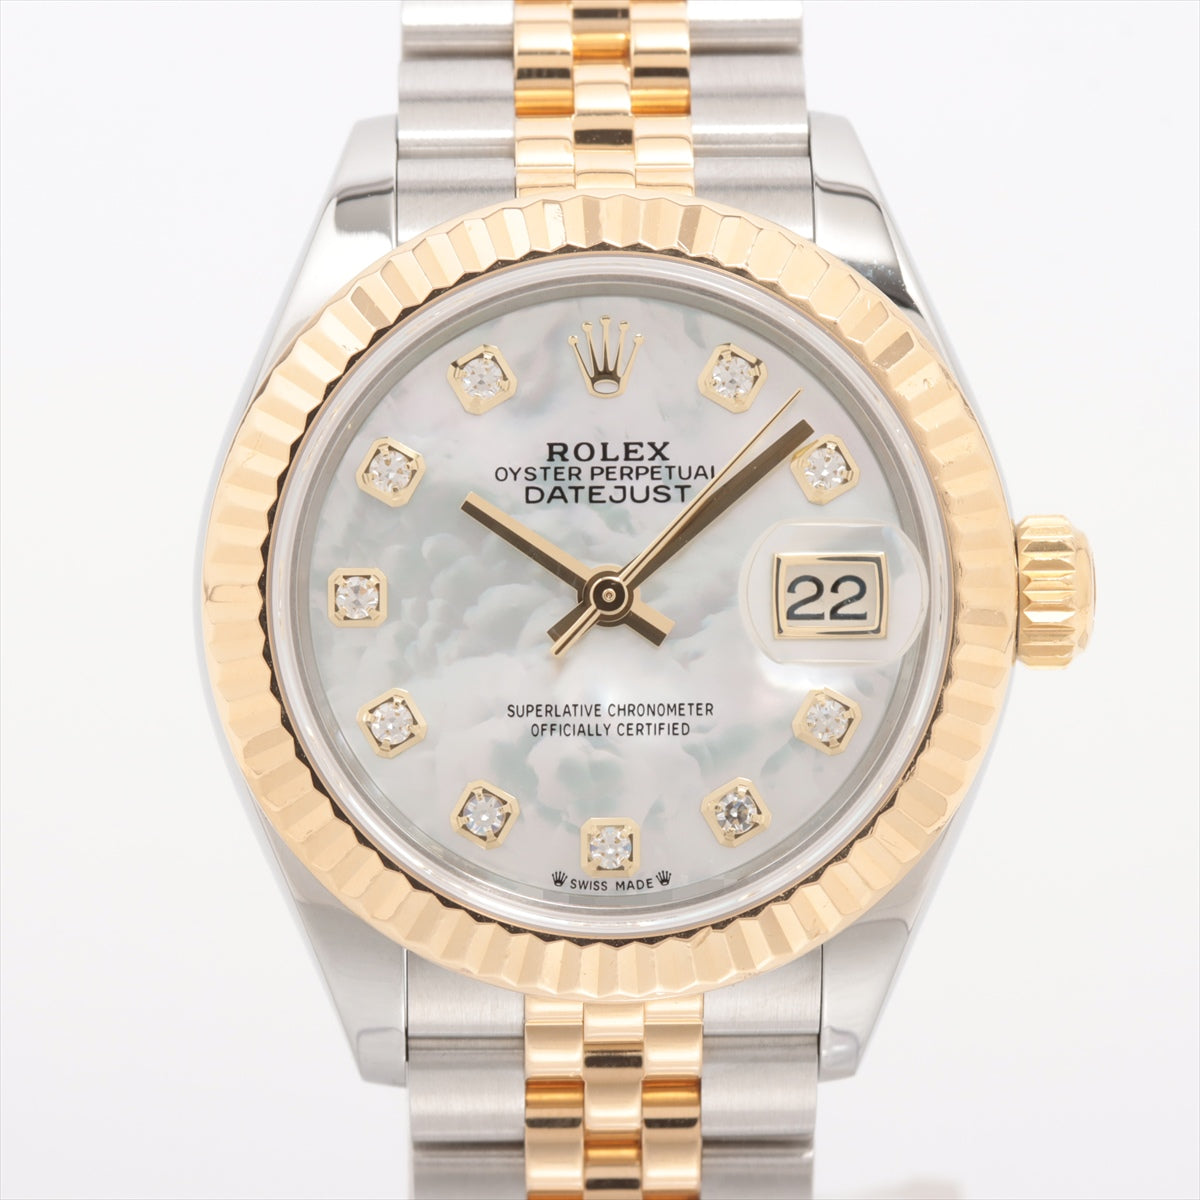 Rolex Datejust 279173NG SSYG AT S Writing s Jubilee Bracelet